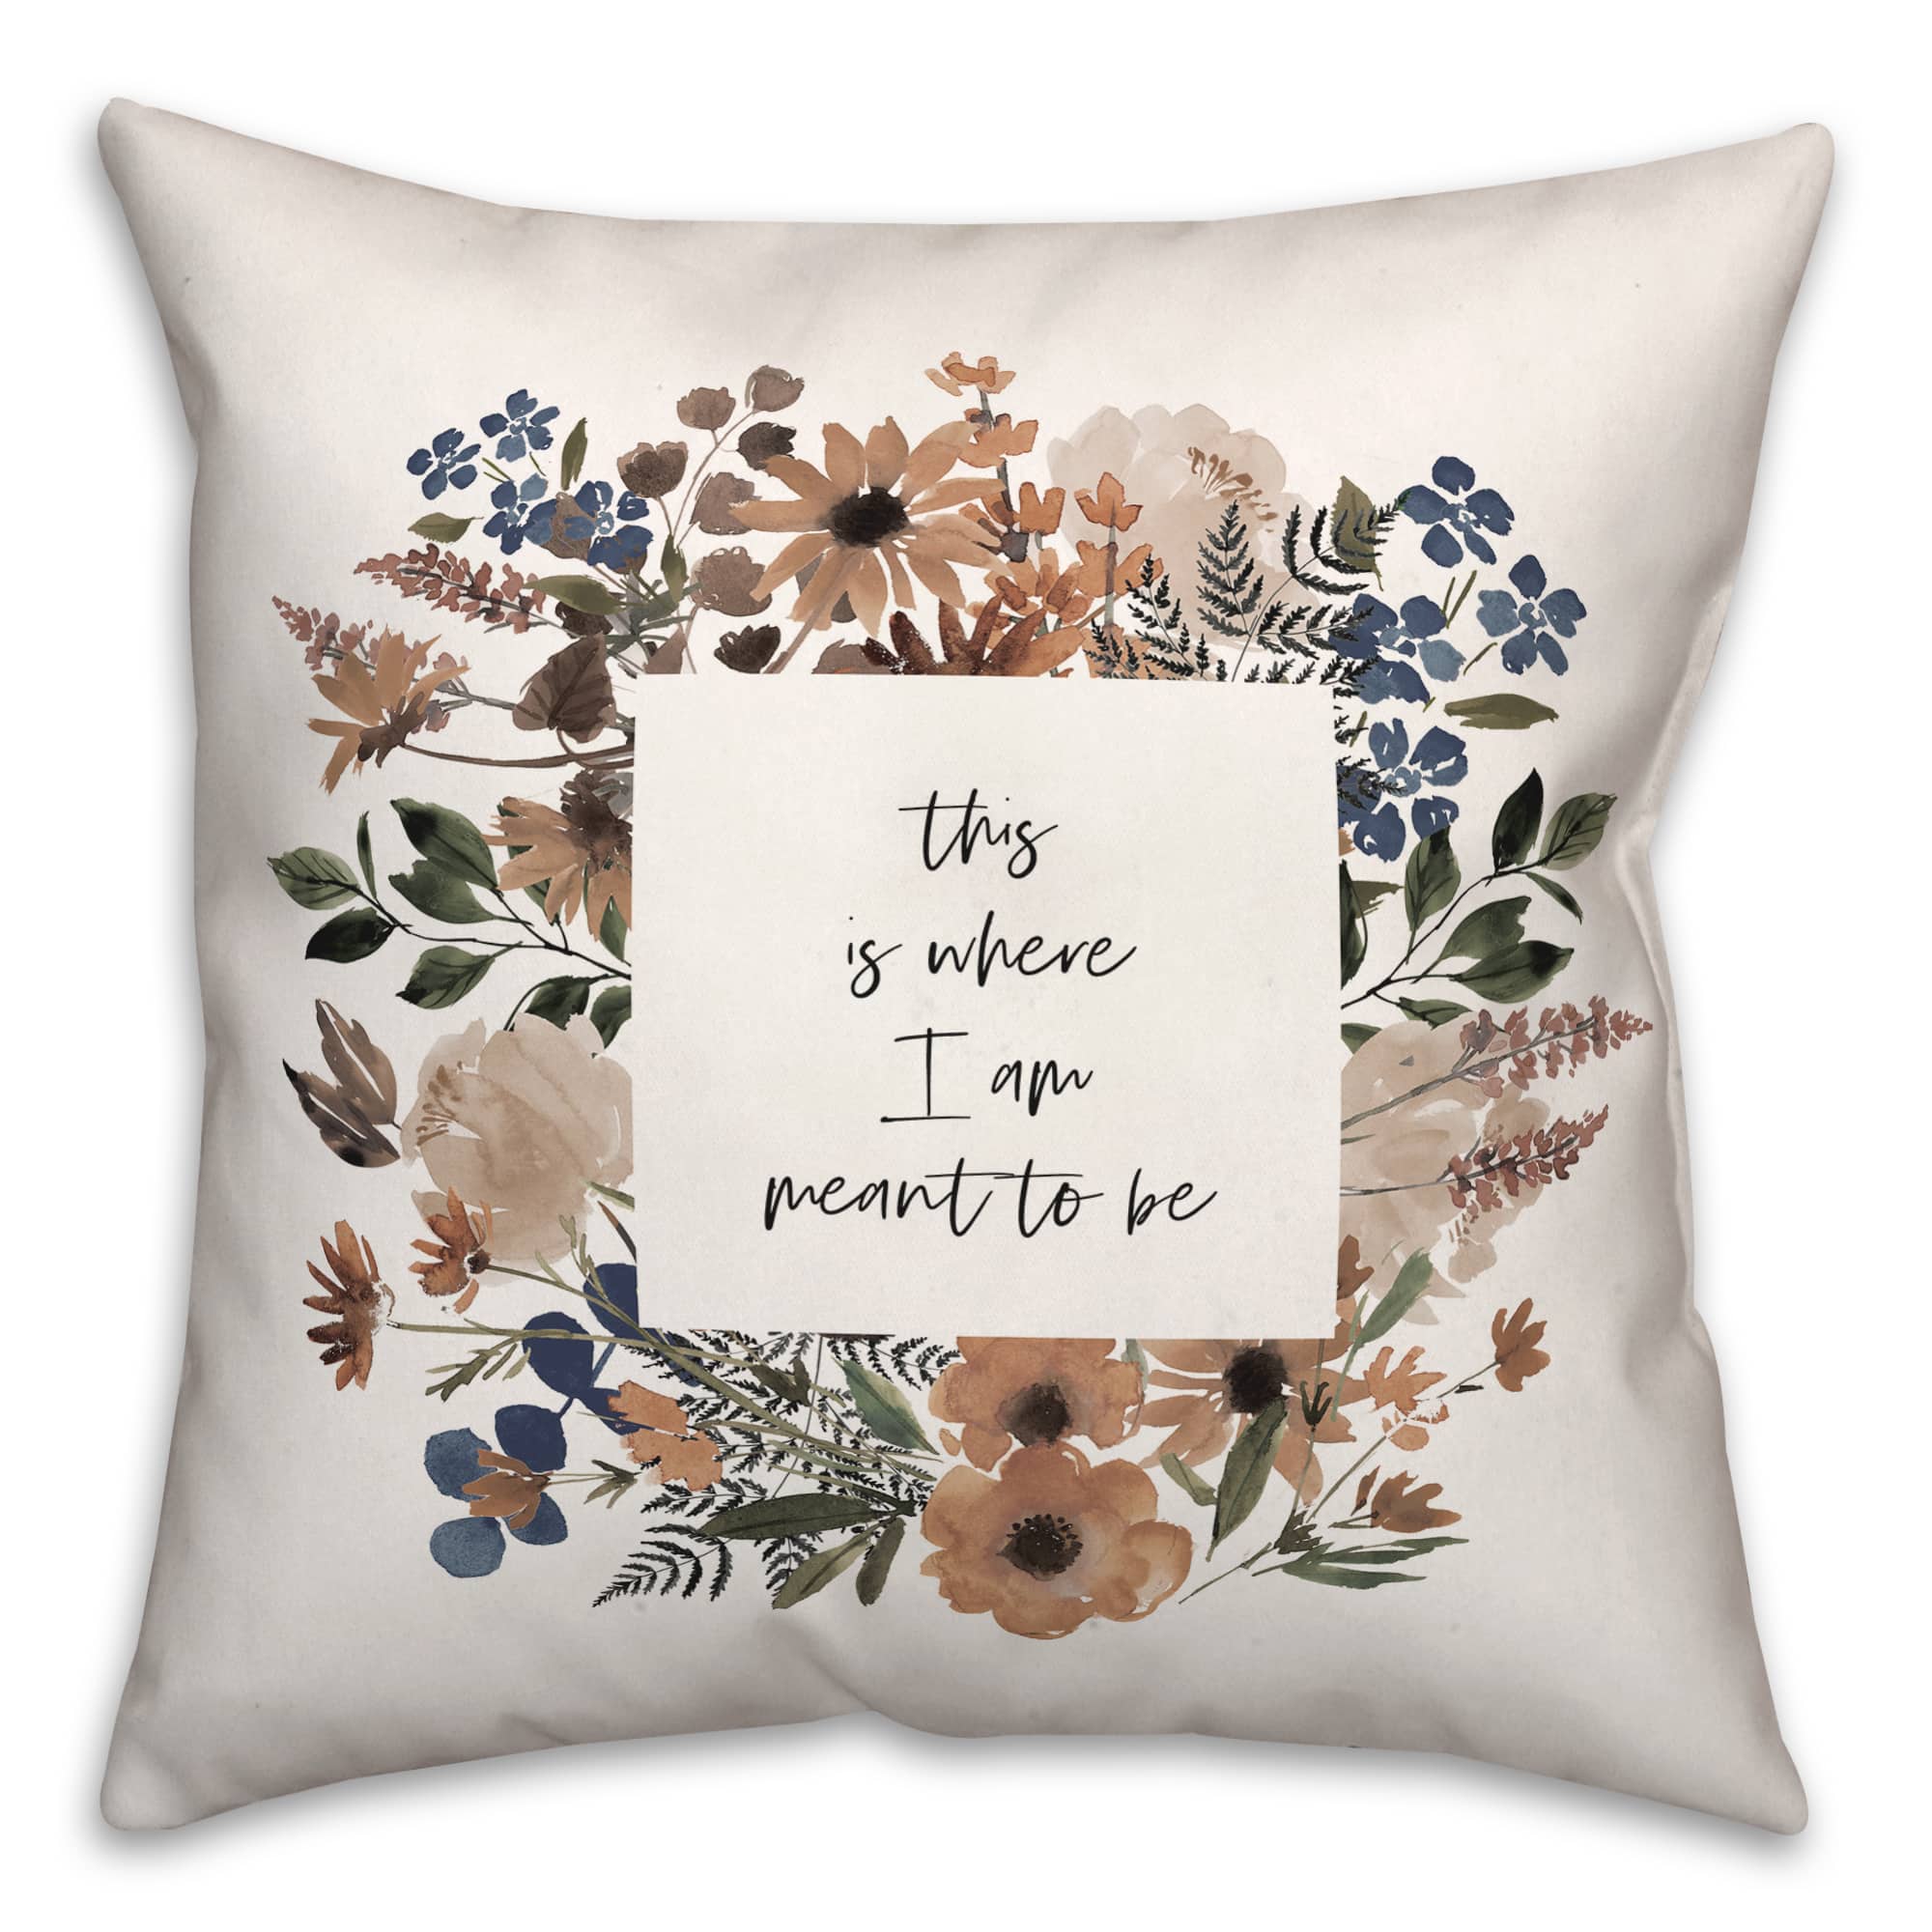 Meant to Be Indoor/Outdoor Pillow